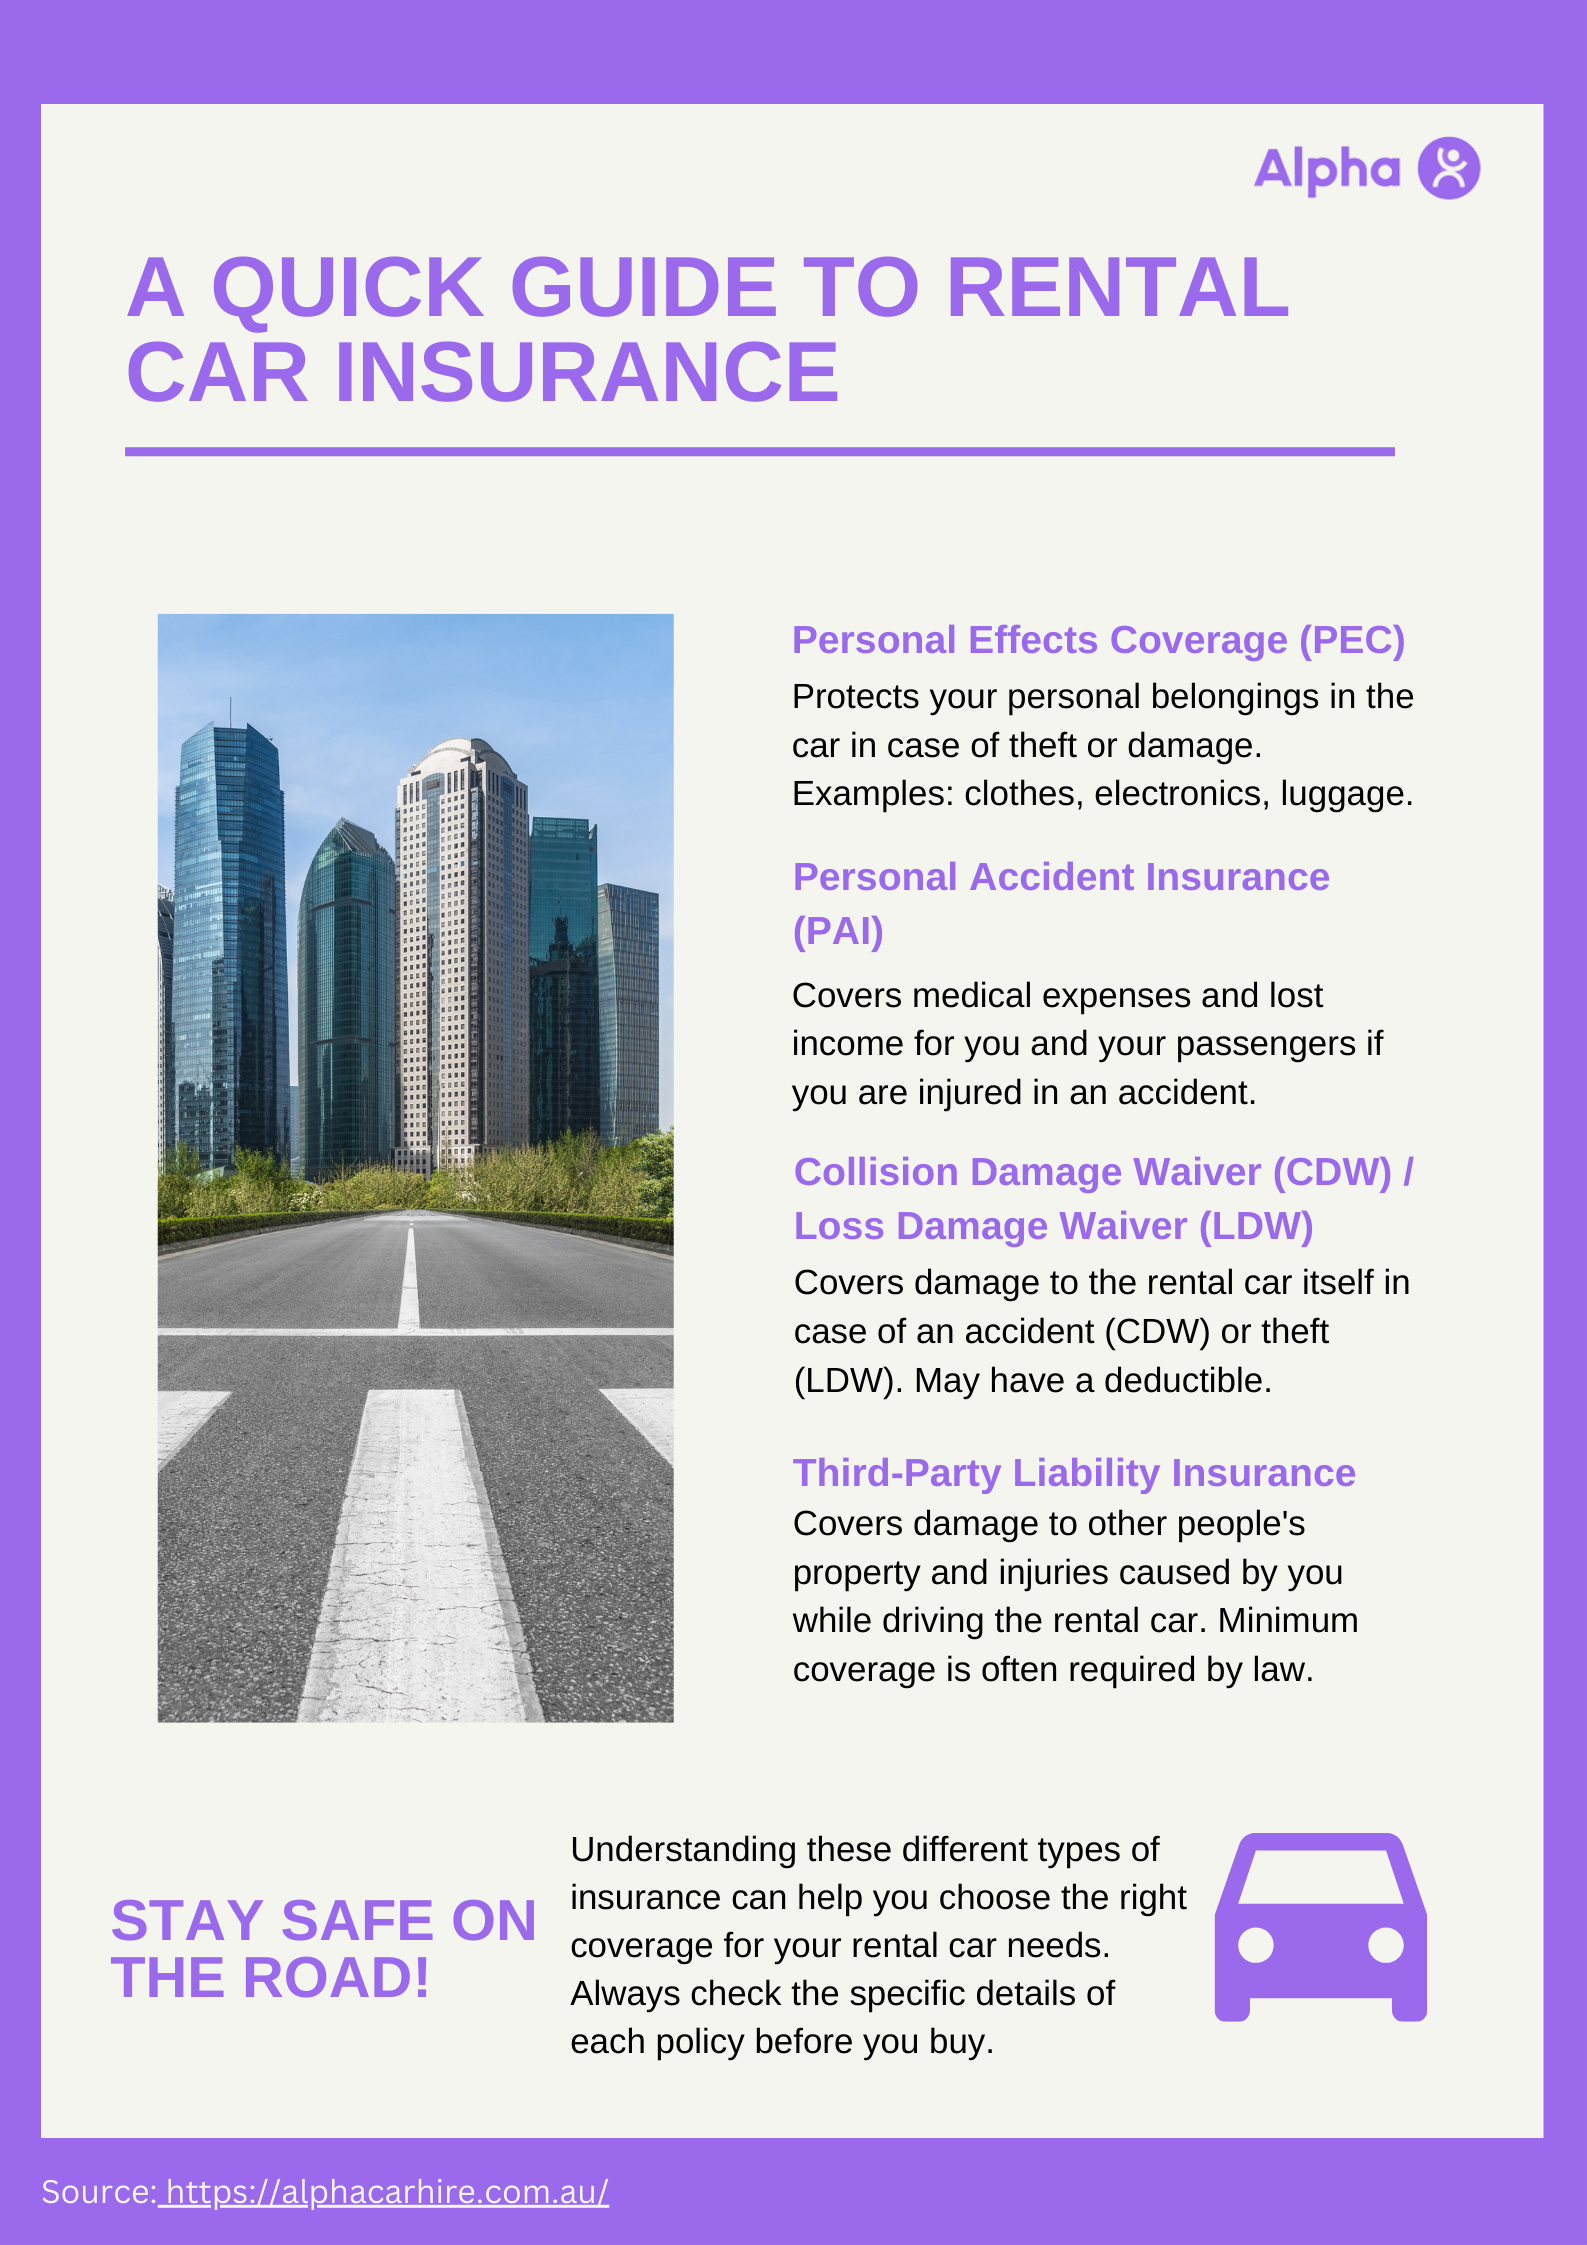 different-renta-car-insurance-infographic